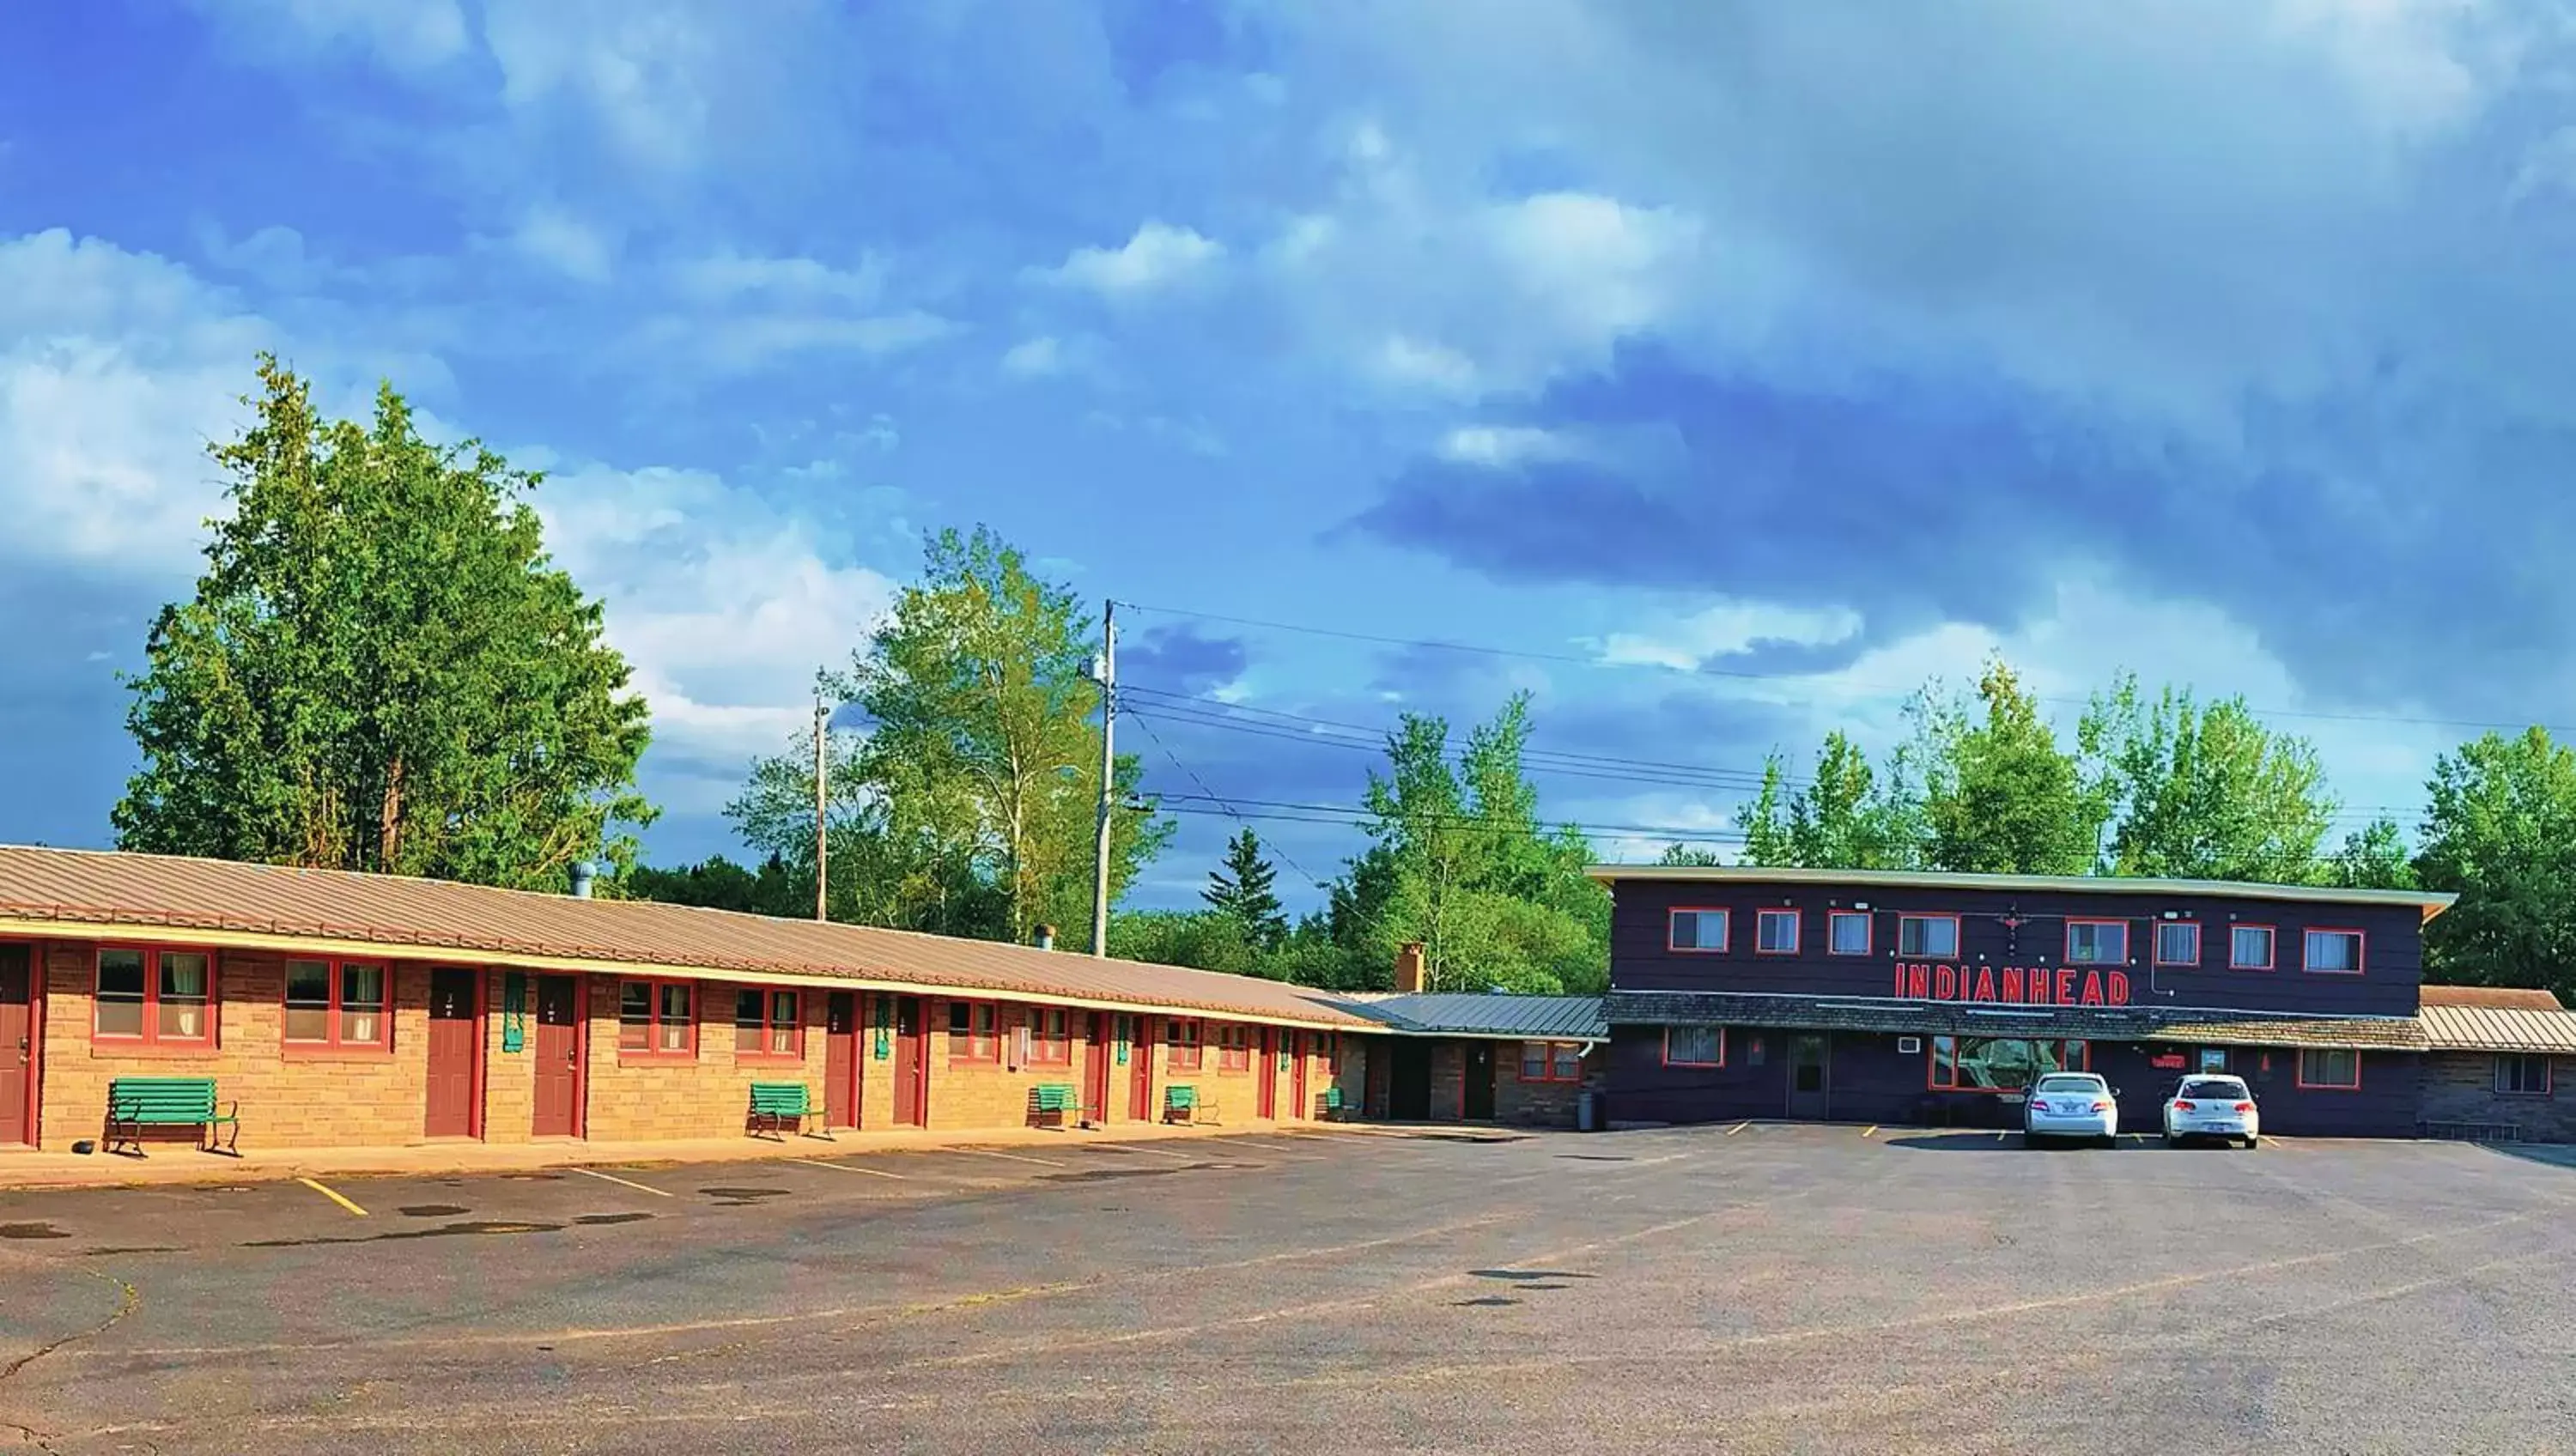 Property Building in Indianhead Ironwood Hotel